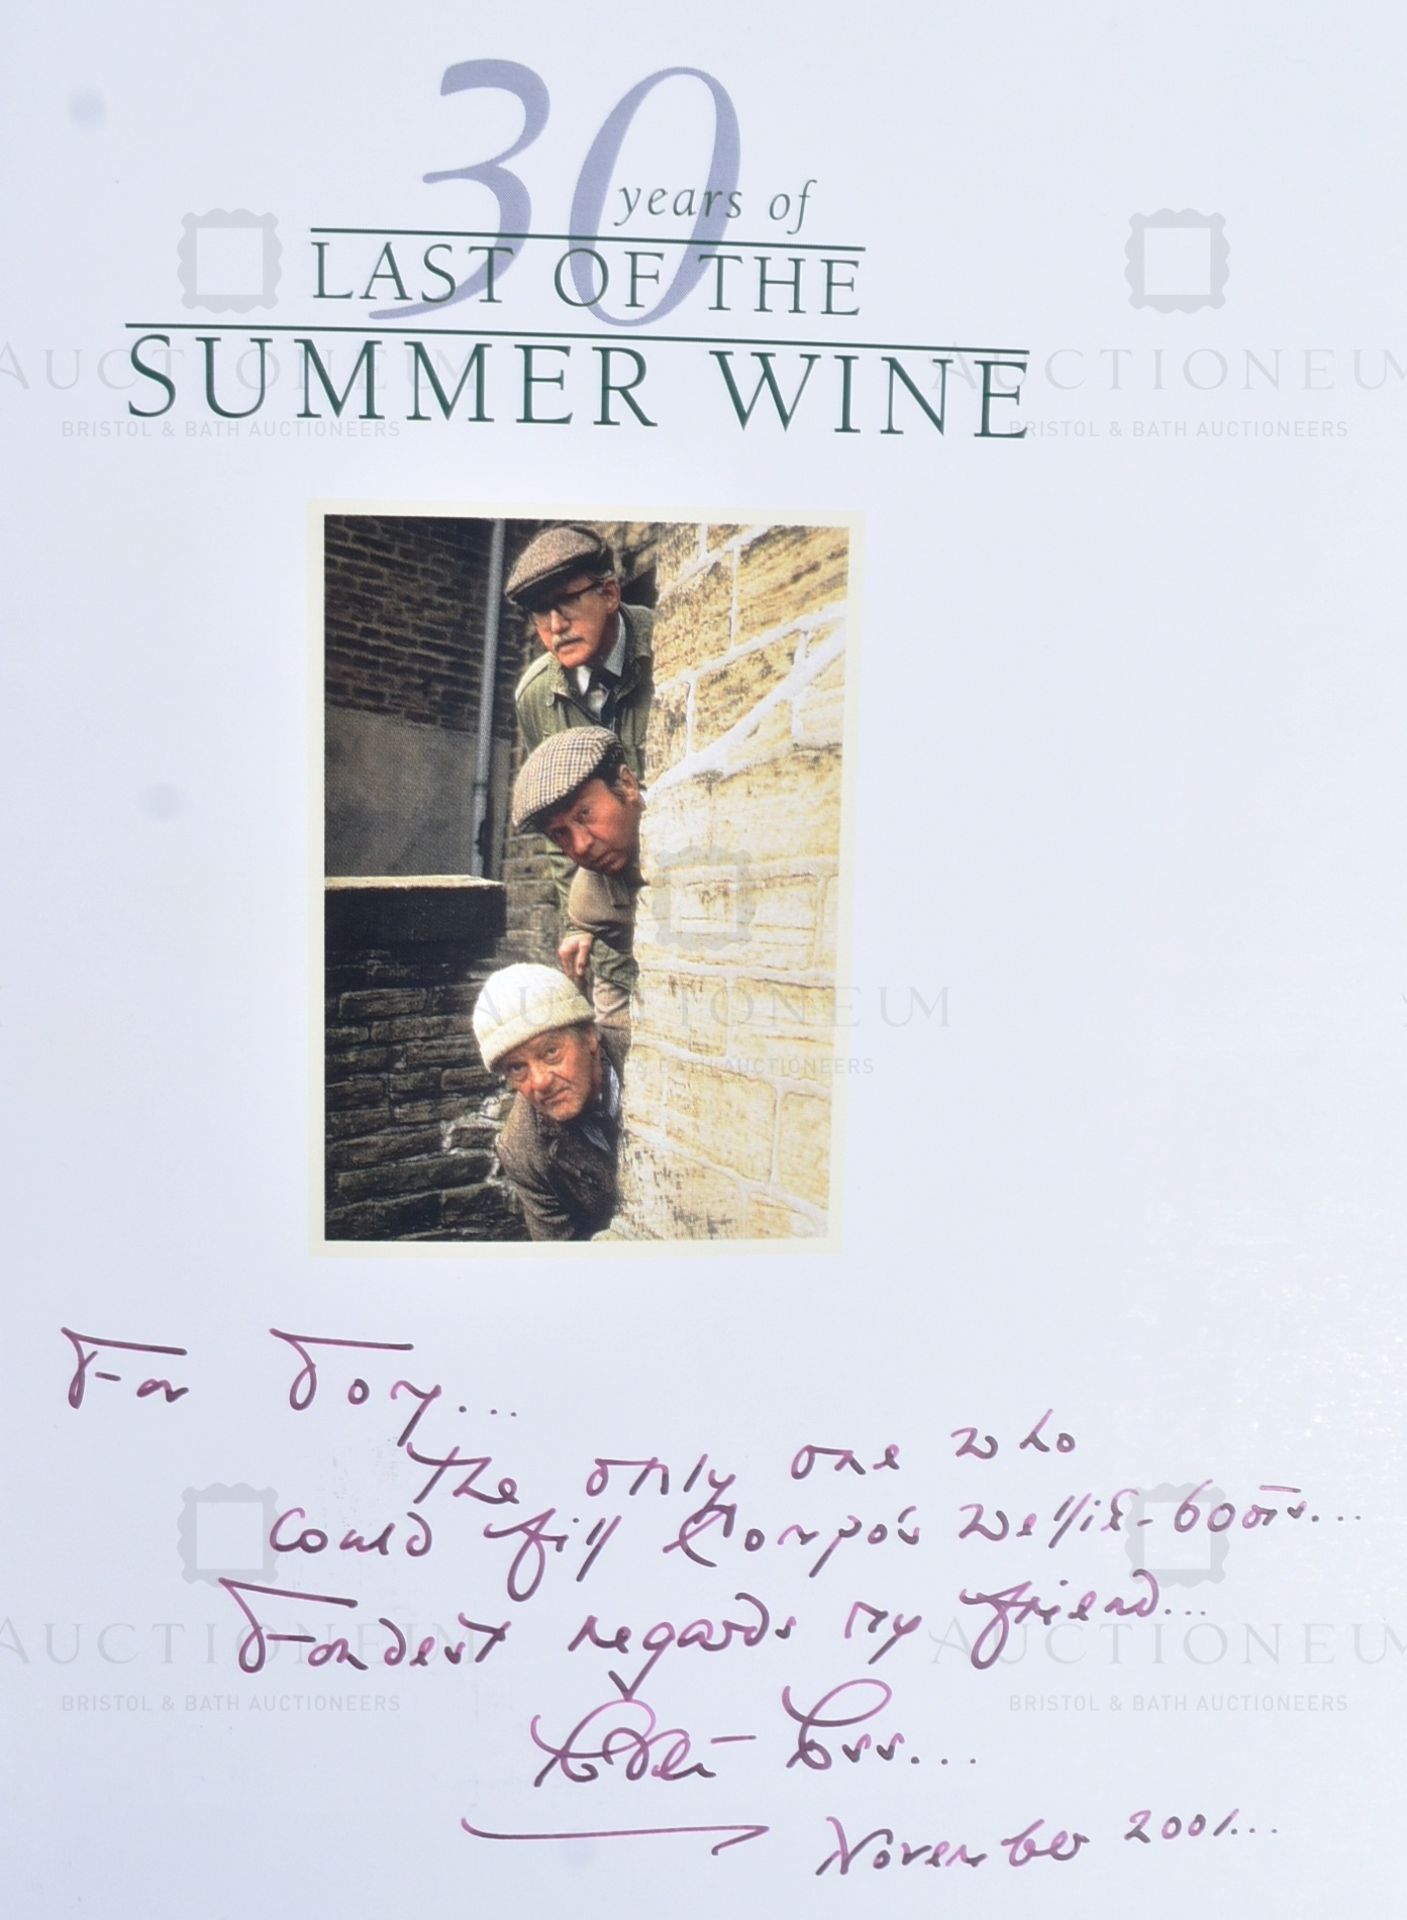 FROM THE ESTATES OF BILL & TOM OWEN - LAST OF THE SUMMER WINE - Image 8 of 8